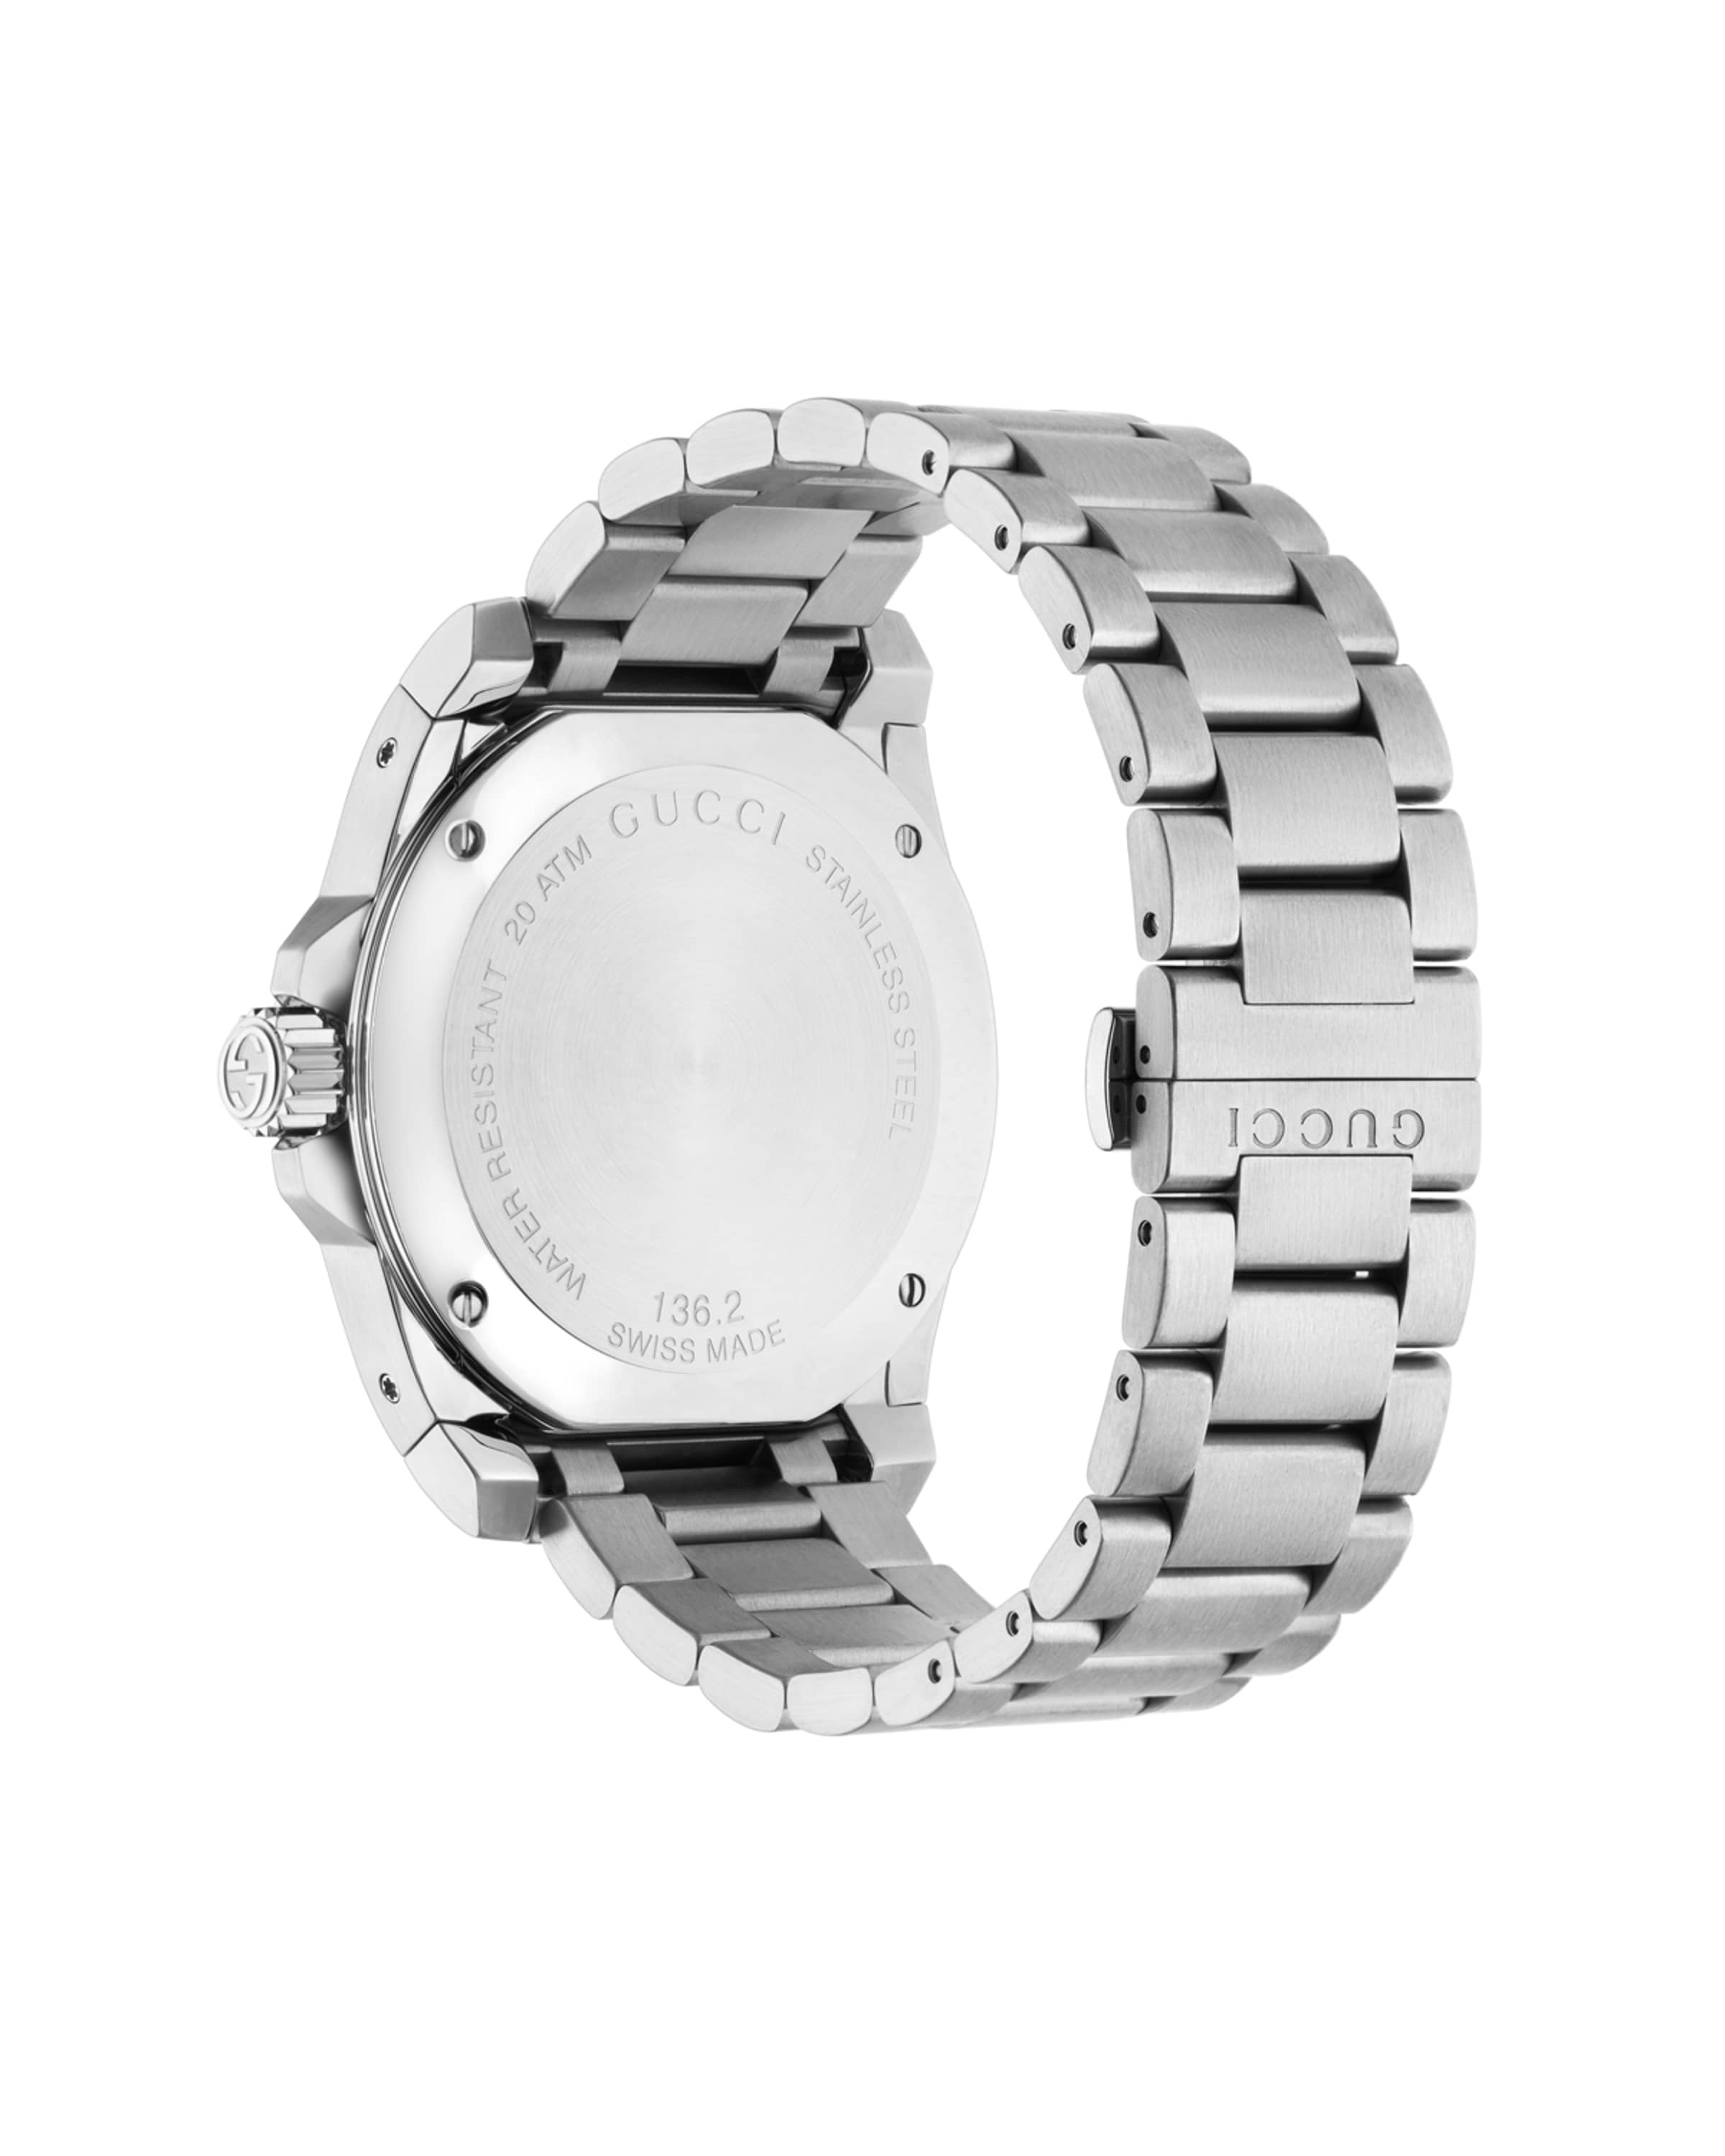 45mm Gucci Dive Stainless Steel Bracelet Watch - 3